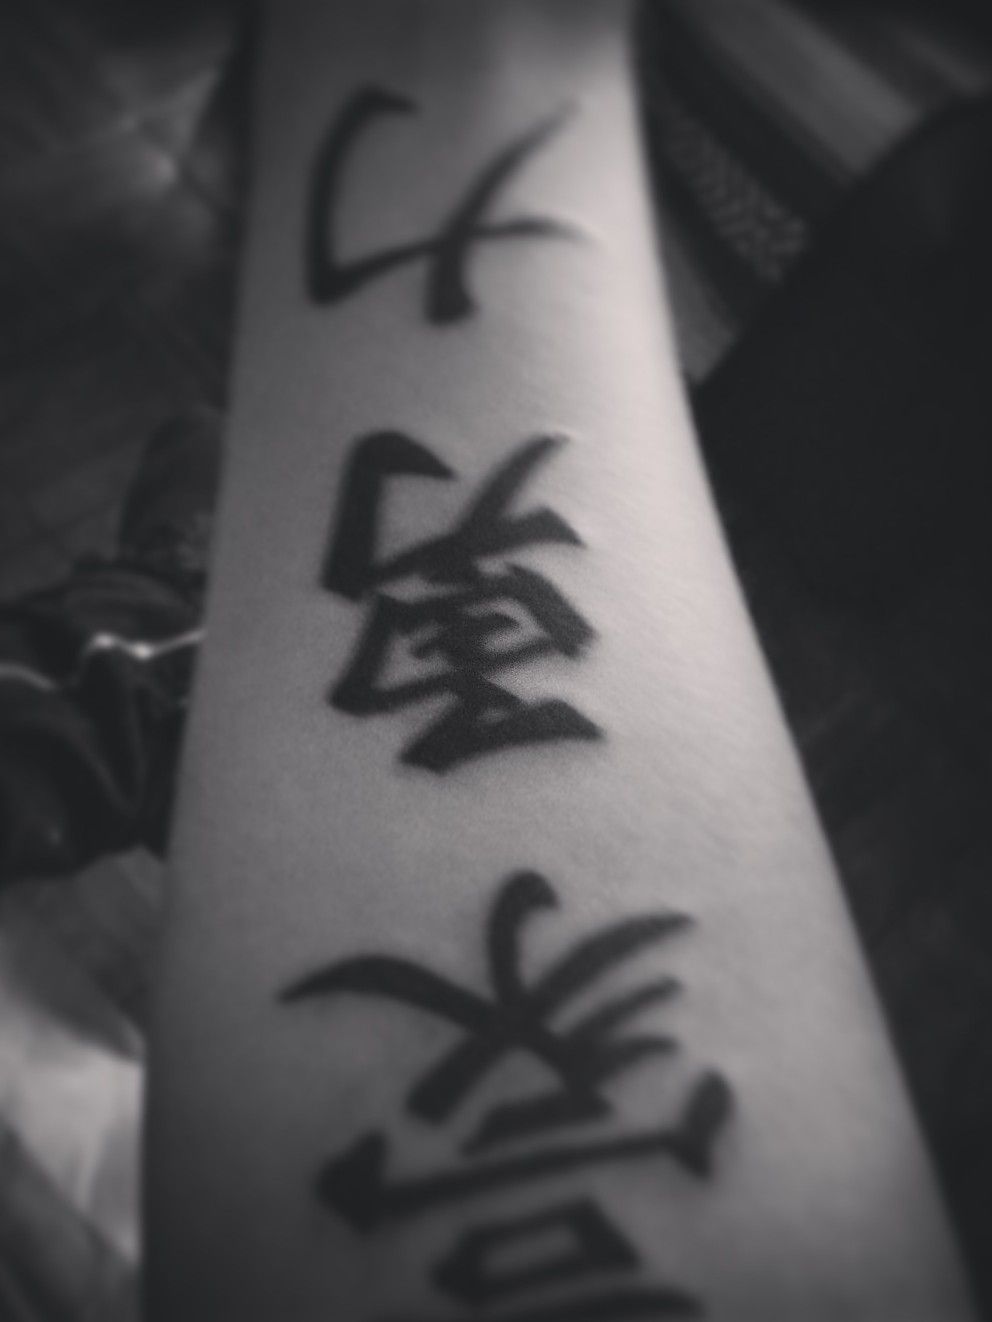 Chinese  English stickon tattoo I just put on my hand without any idea  what it is Looking for translation and possibly meaning if any   rtranslator